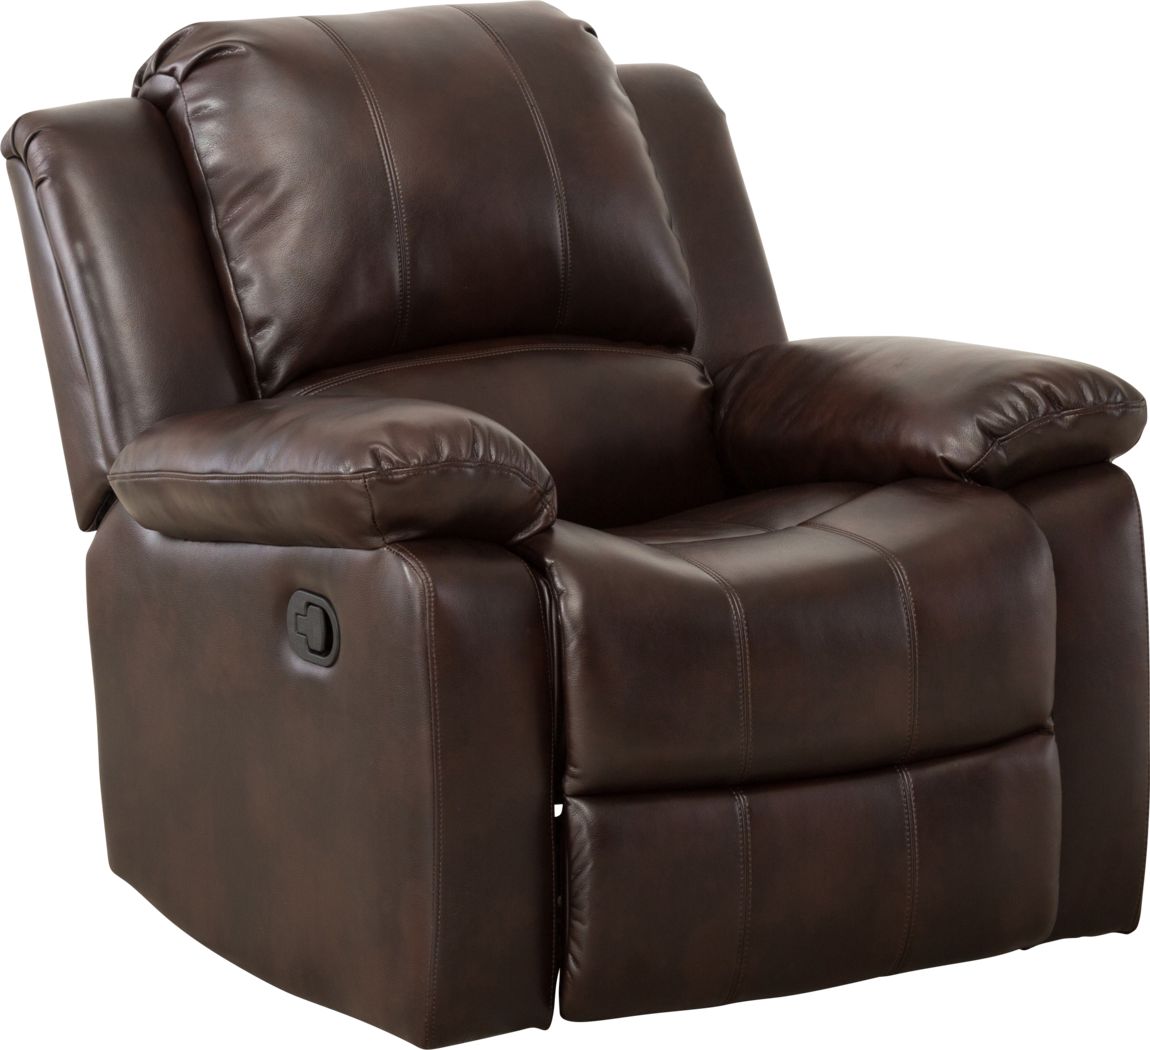 Leather Fabric Brown Reclining Chairs, Dark Brown Leather Reclining Armchair With Ottoman